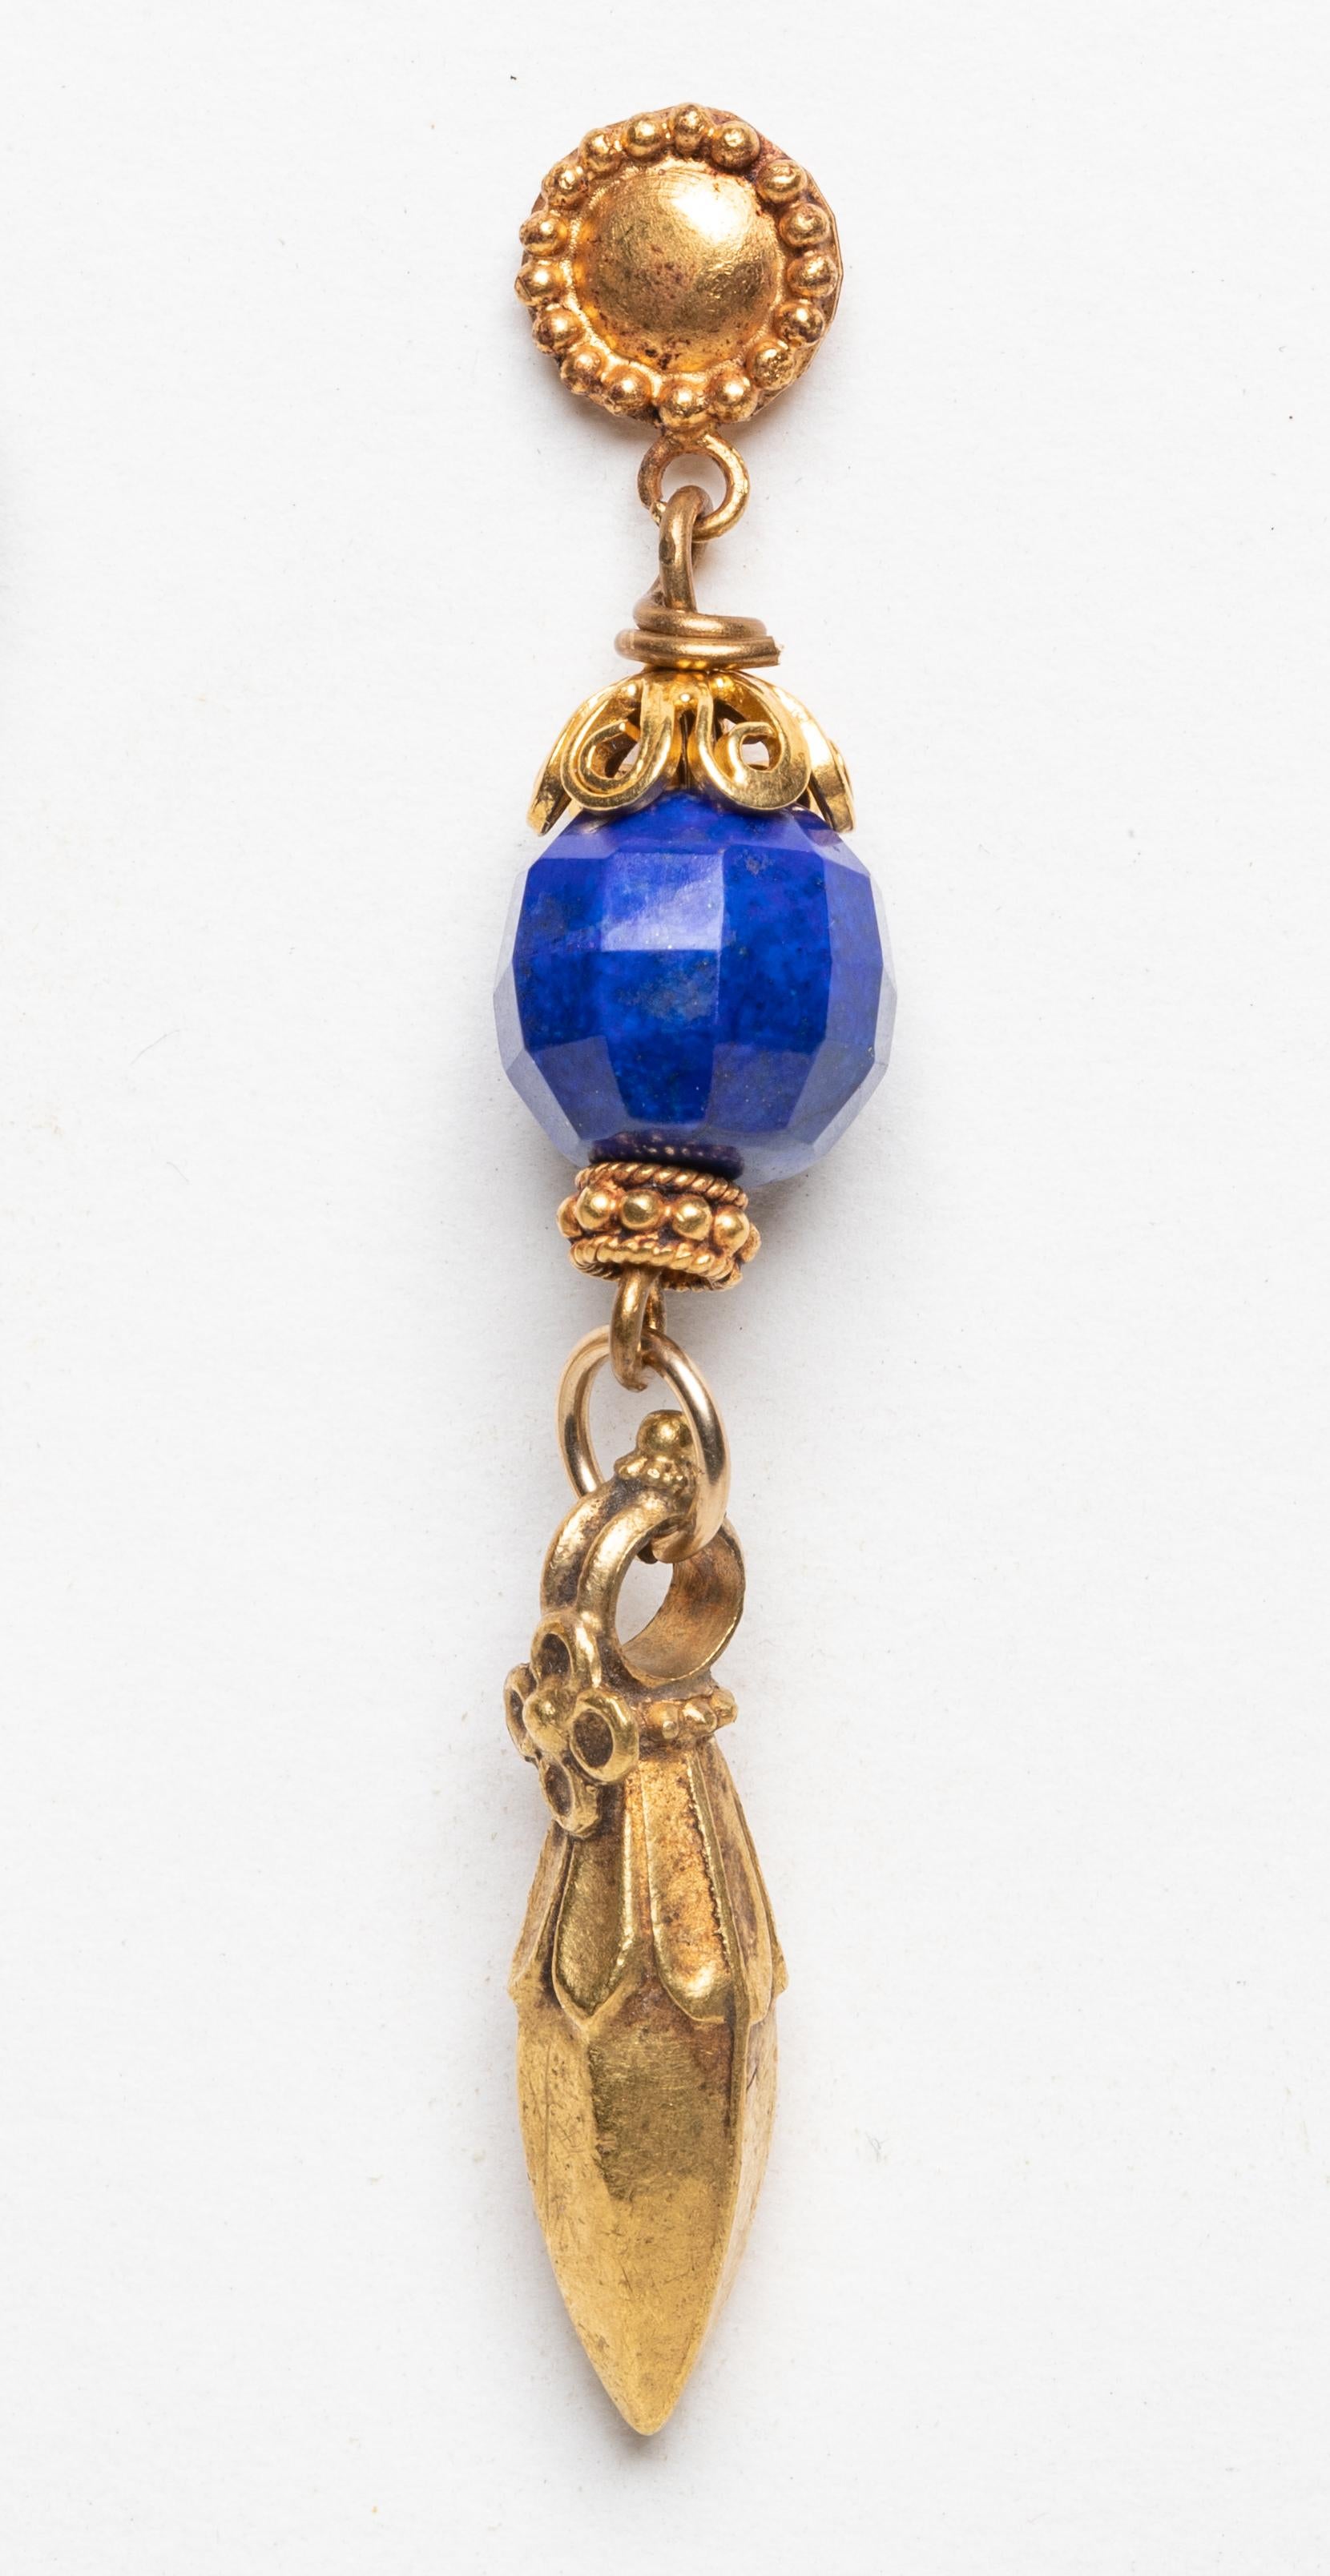 A lovely mix of finely tooled 22K gold with unusual, faceted lapis lazuli beads by Deborah Lockhart Phillips.  22K gold post for pierced ears.